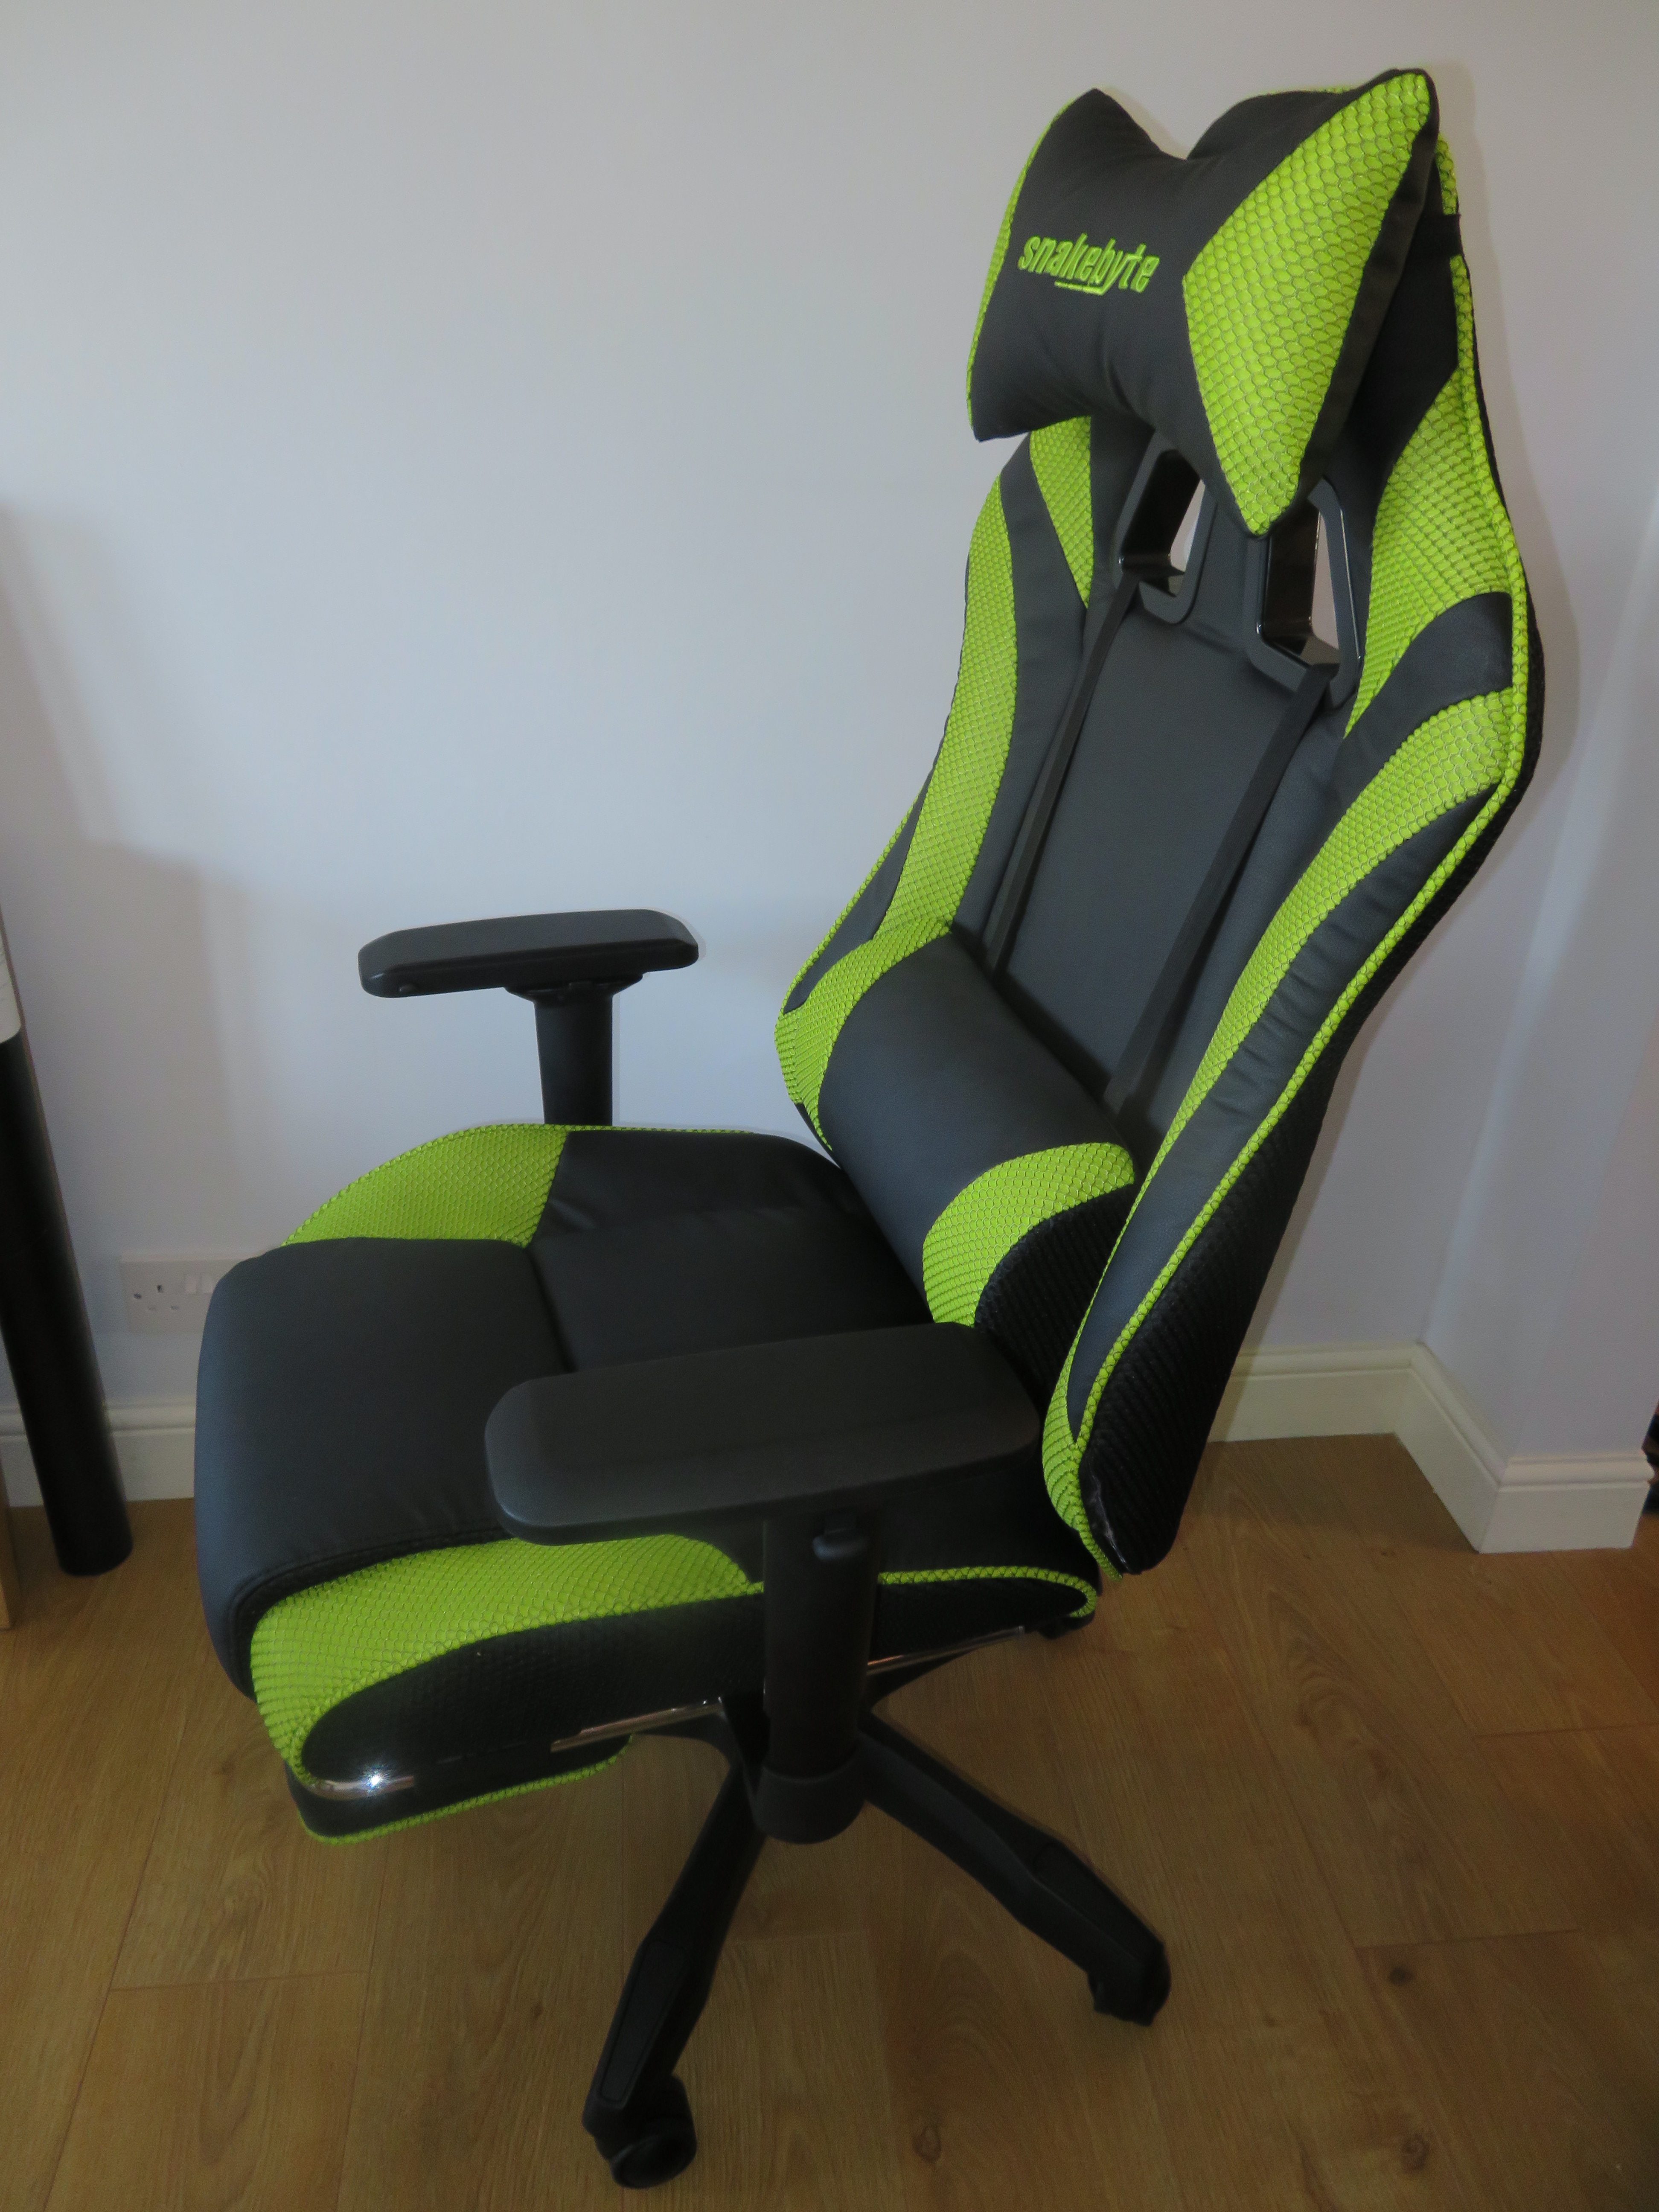 snakebyte GAMING:SEAT Adjustable Desk Chair for Gamers Black/Yellow 